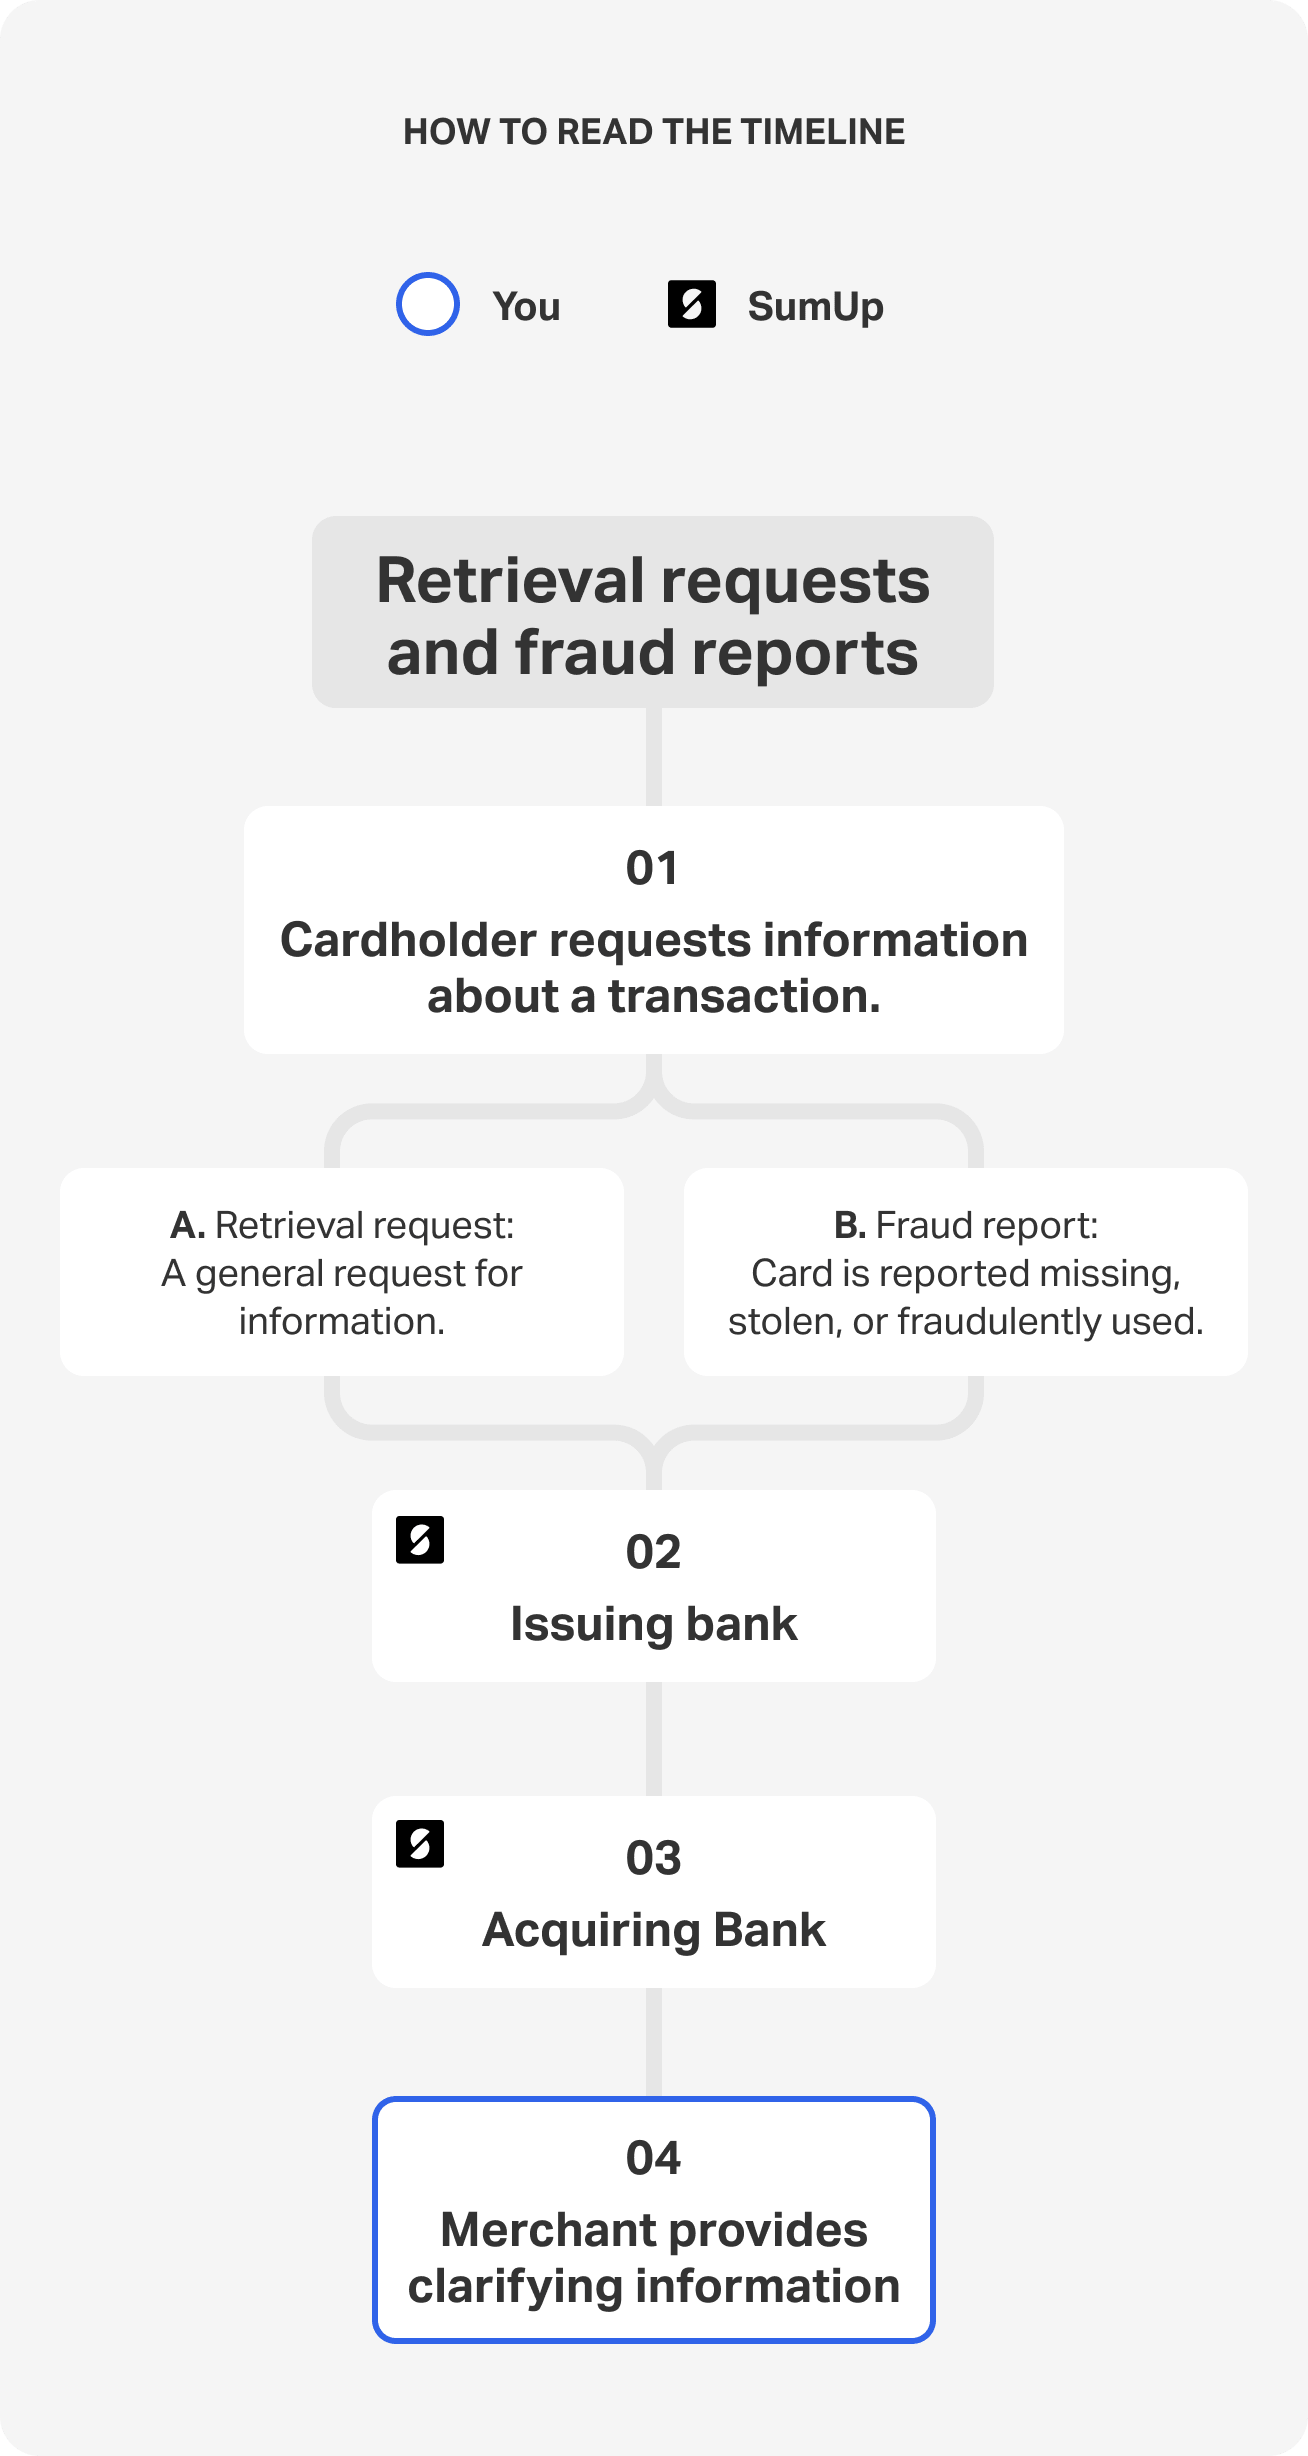 A flow chart showing the process of fraud reports and retrieval requests:
1. The cardholder queries a transaction.
2. The cardholder's bank request more information about the transaction from the merchant.
3. The merchant provides more information on the transaction.
4. If no information is provided or if the information is unsatisfactory, a chargeback may follow.